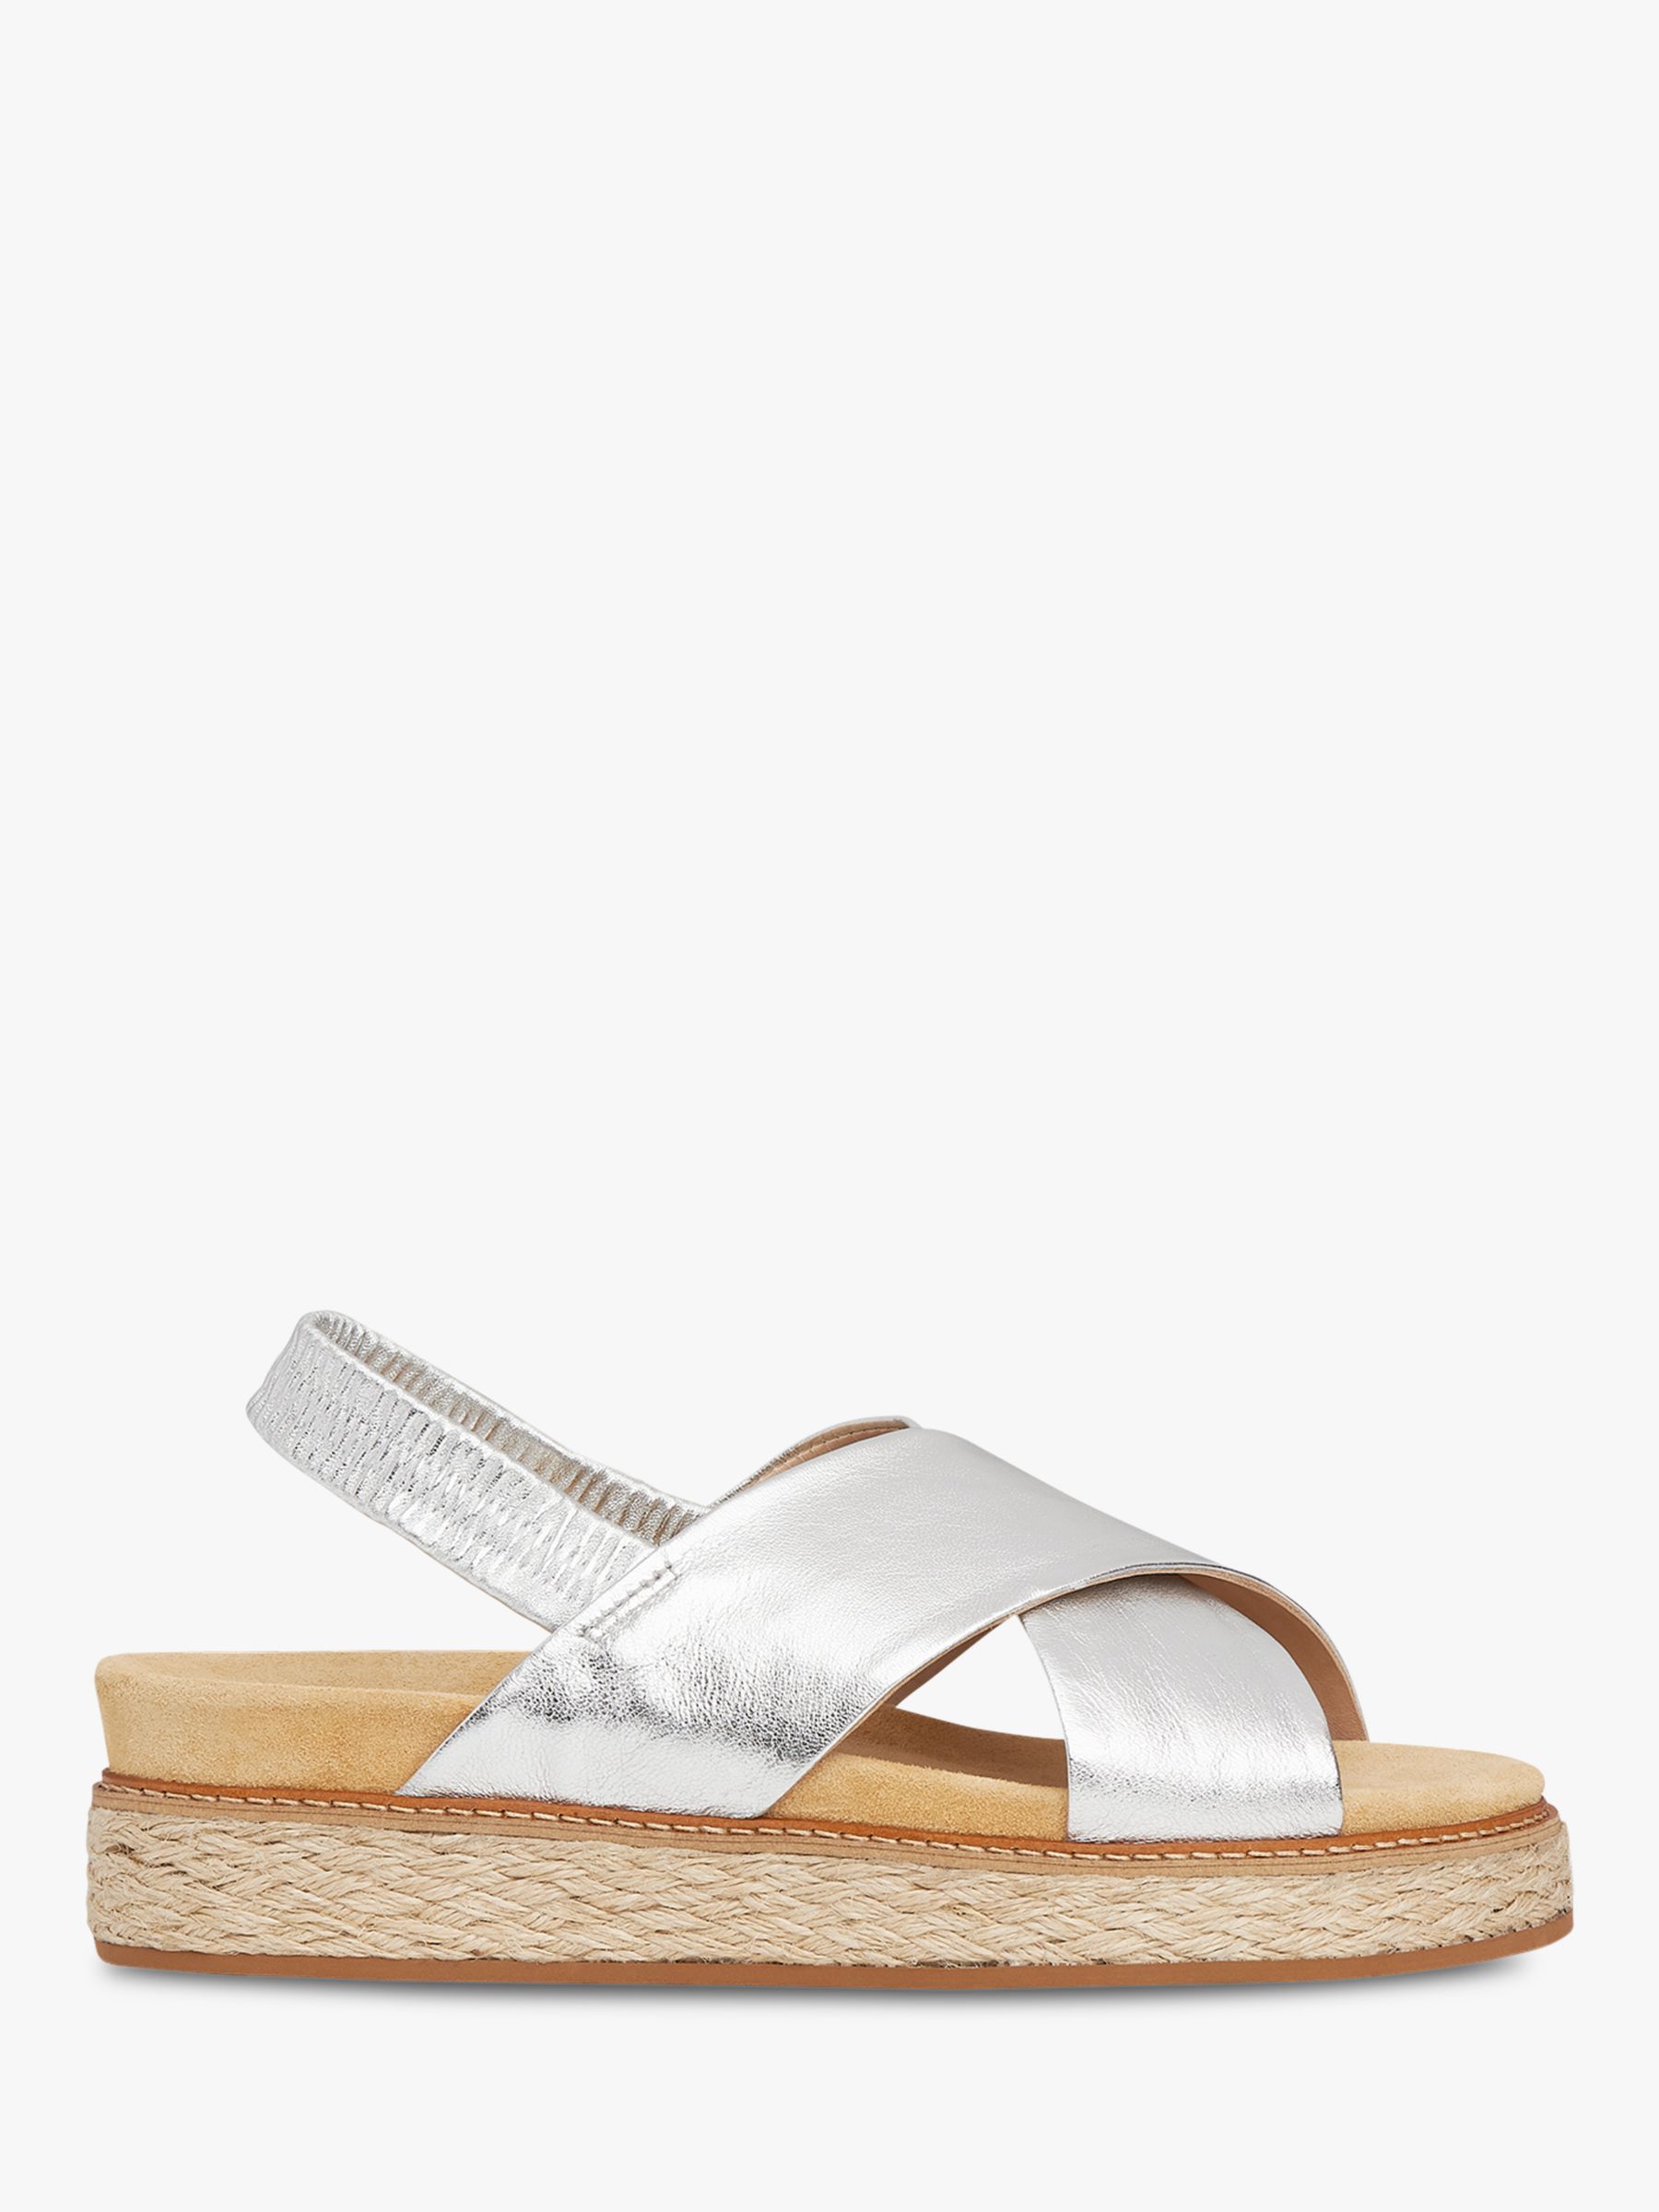 Whistles Robyn Cross Strap Sandals